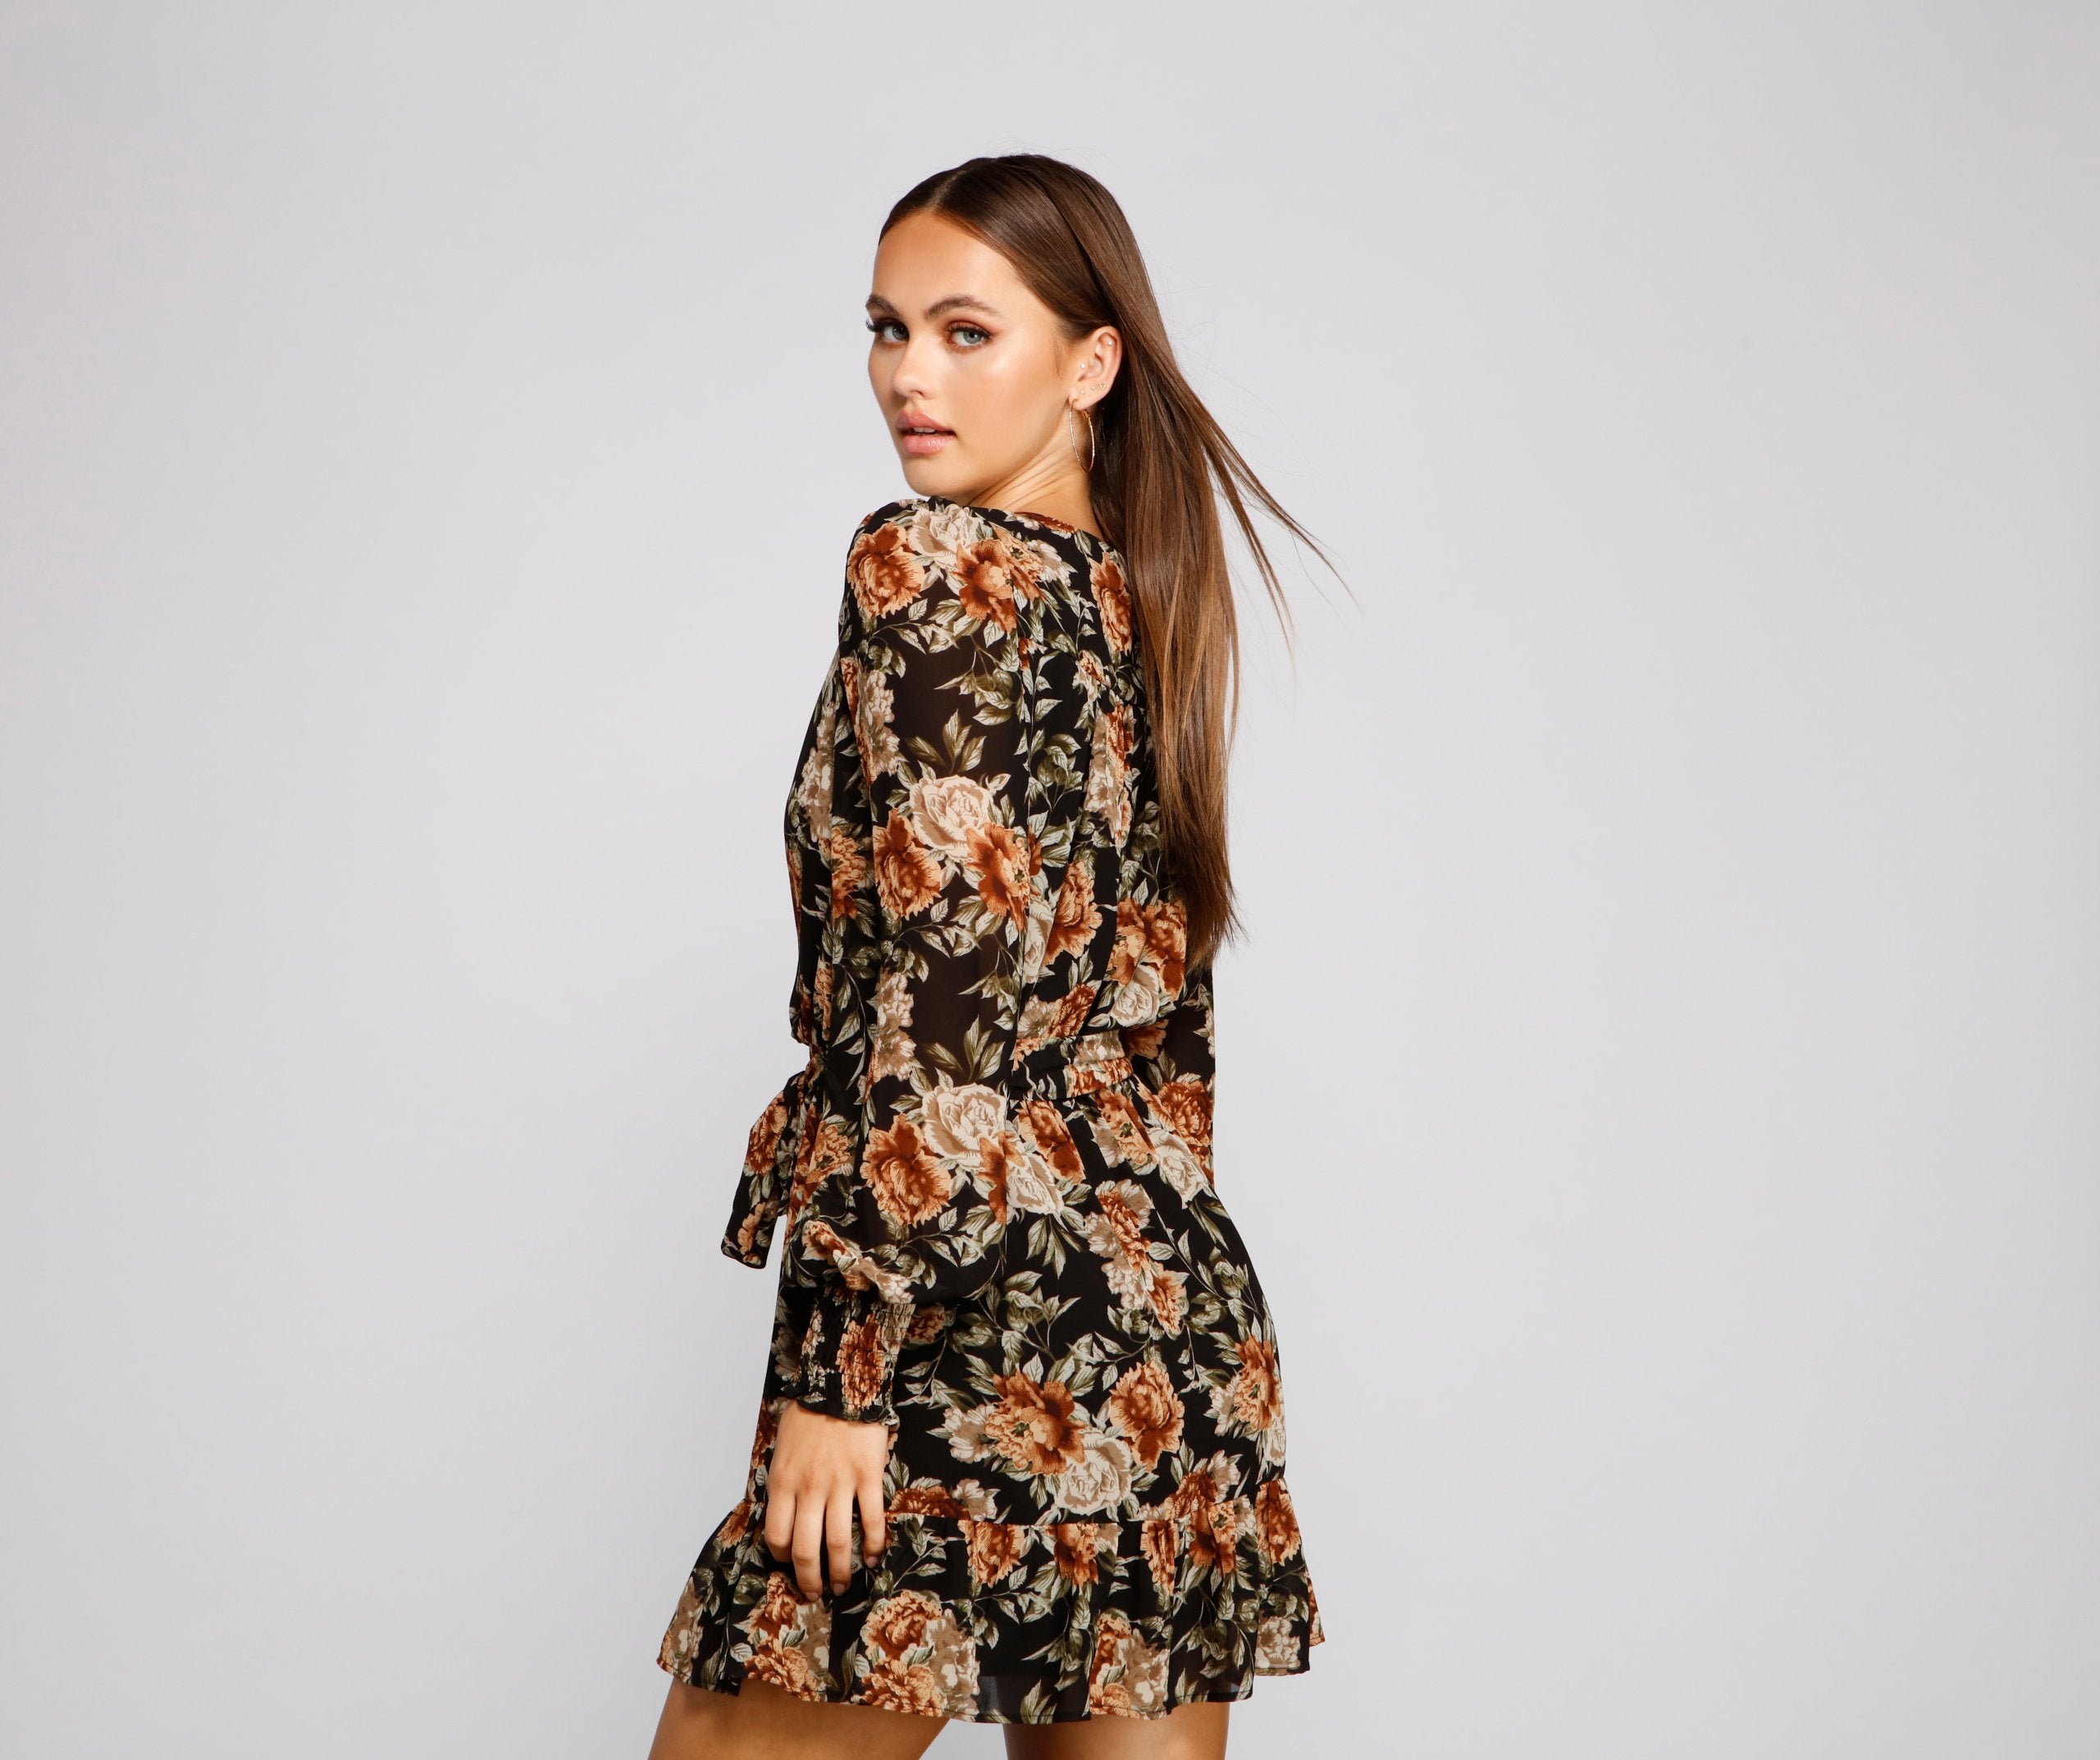 Ruffled Romance Floral Skater Dress - Lady Occasions